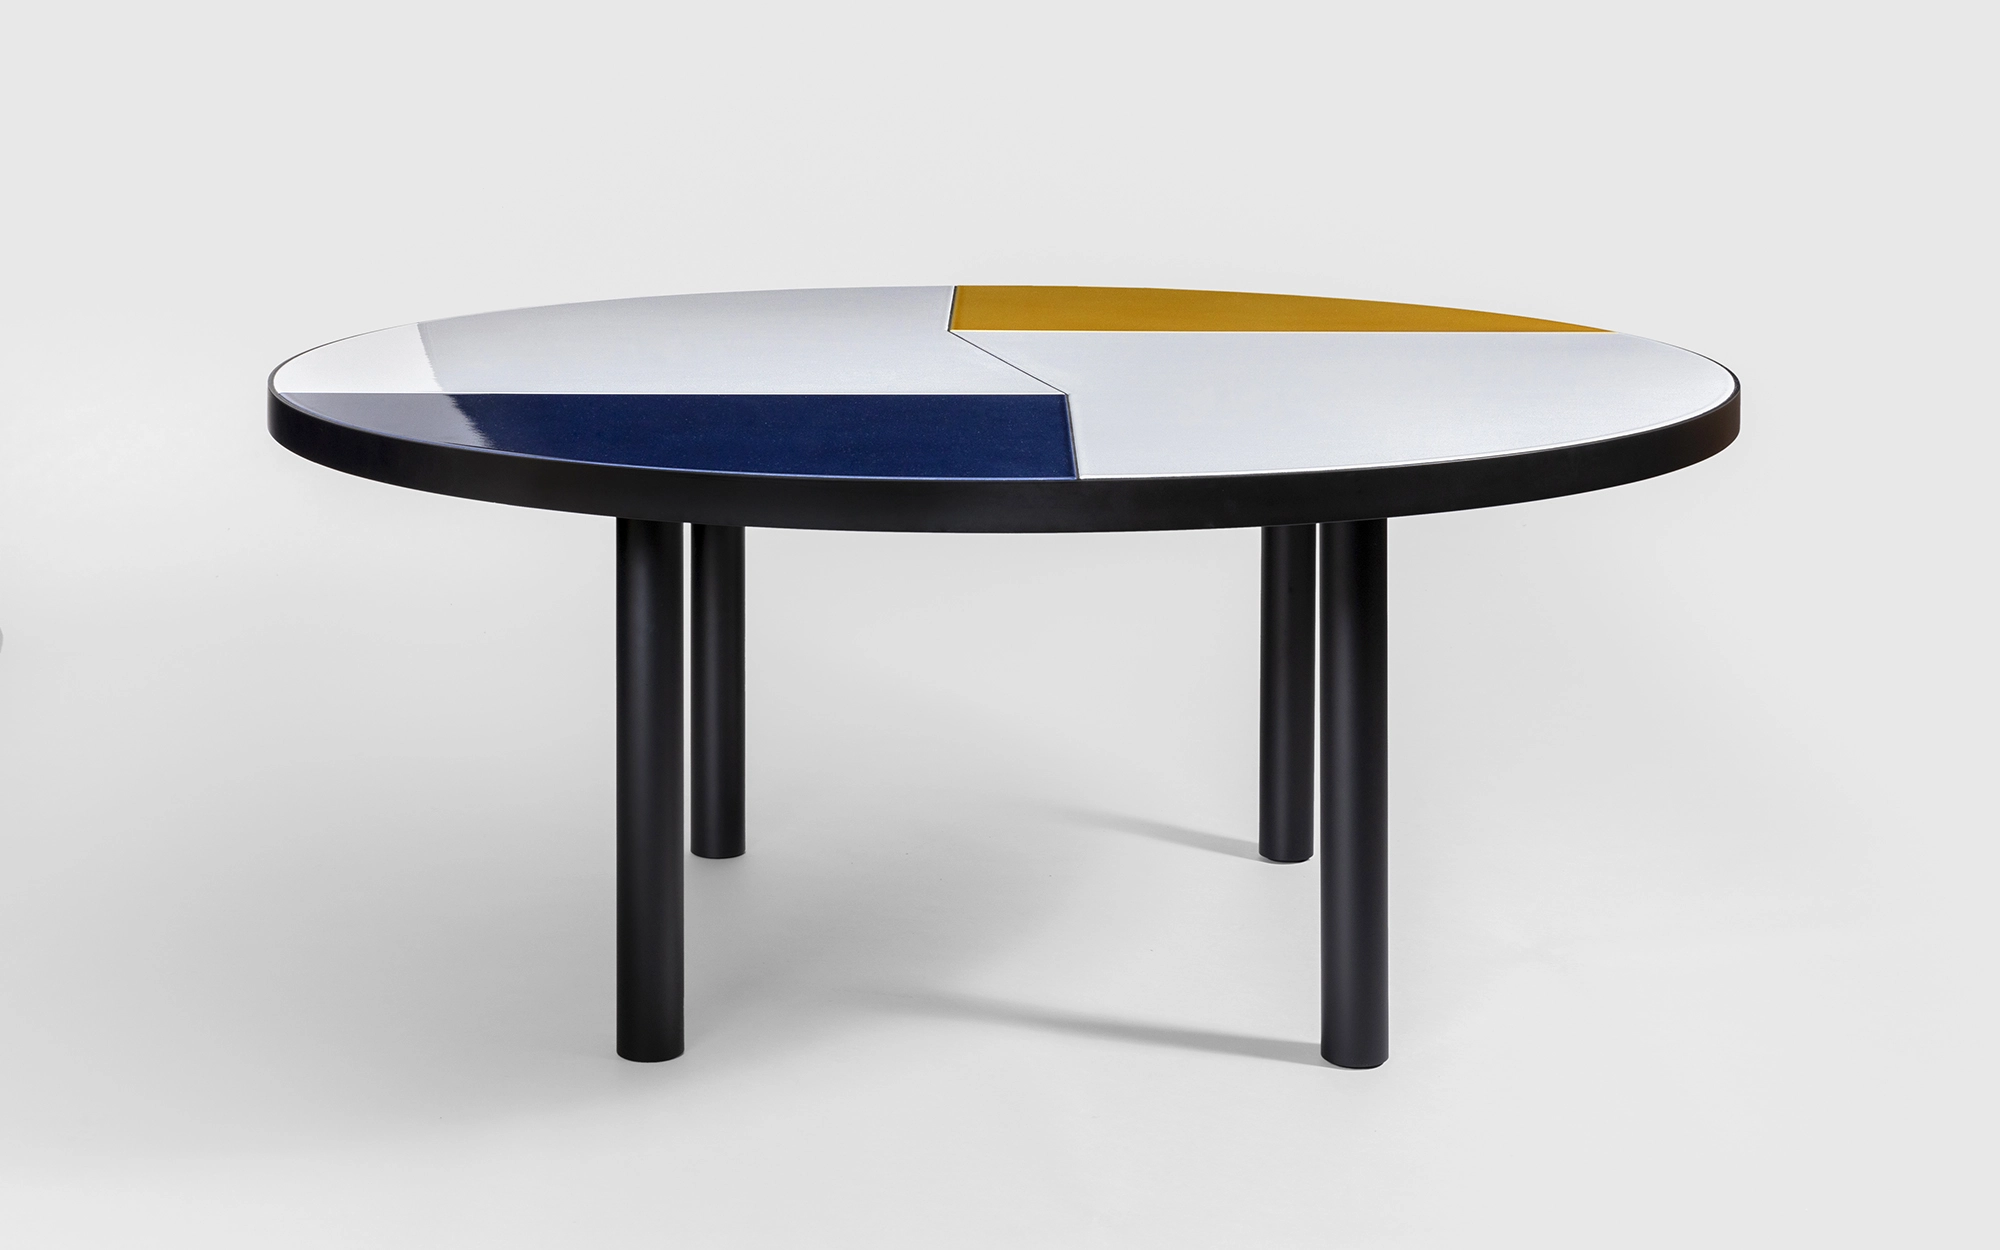 Fraction Dining Table - Pierre Charpin - Side table - Galerie kreo